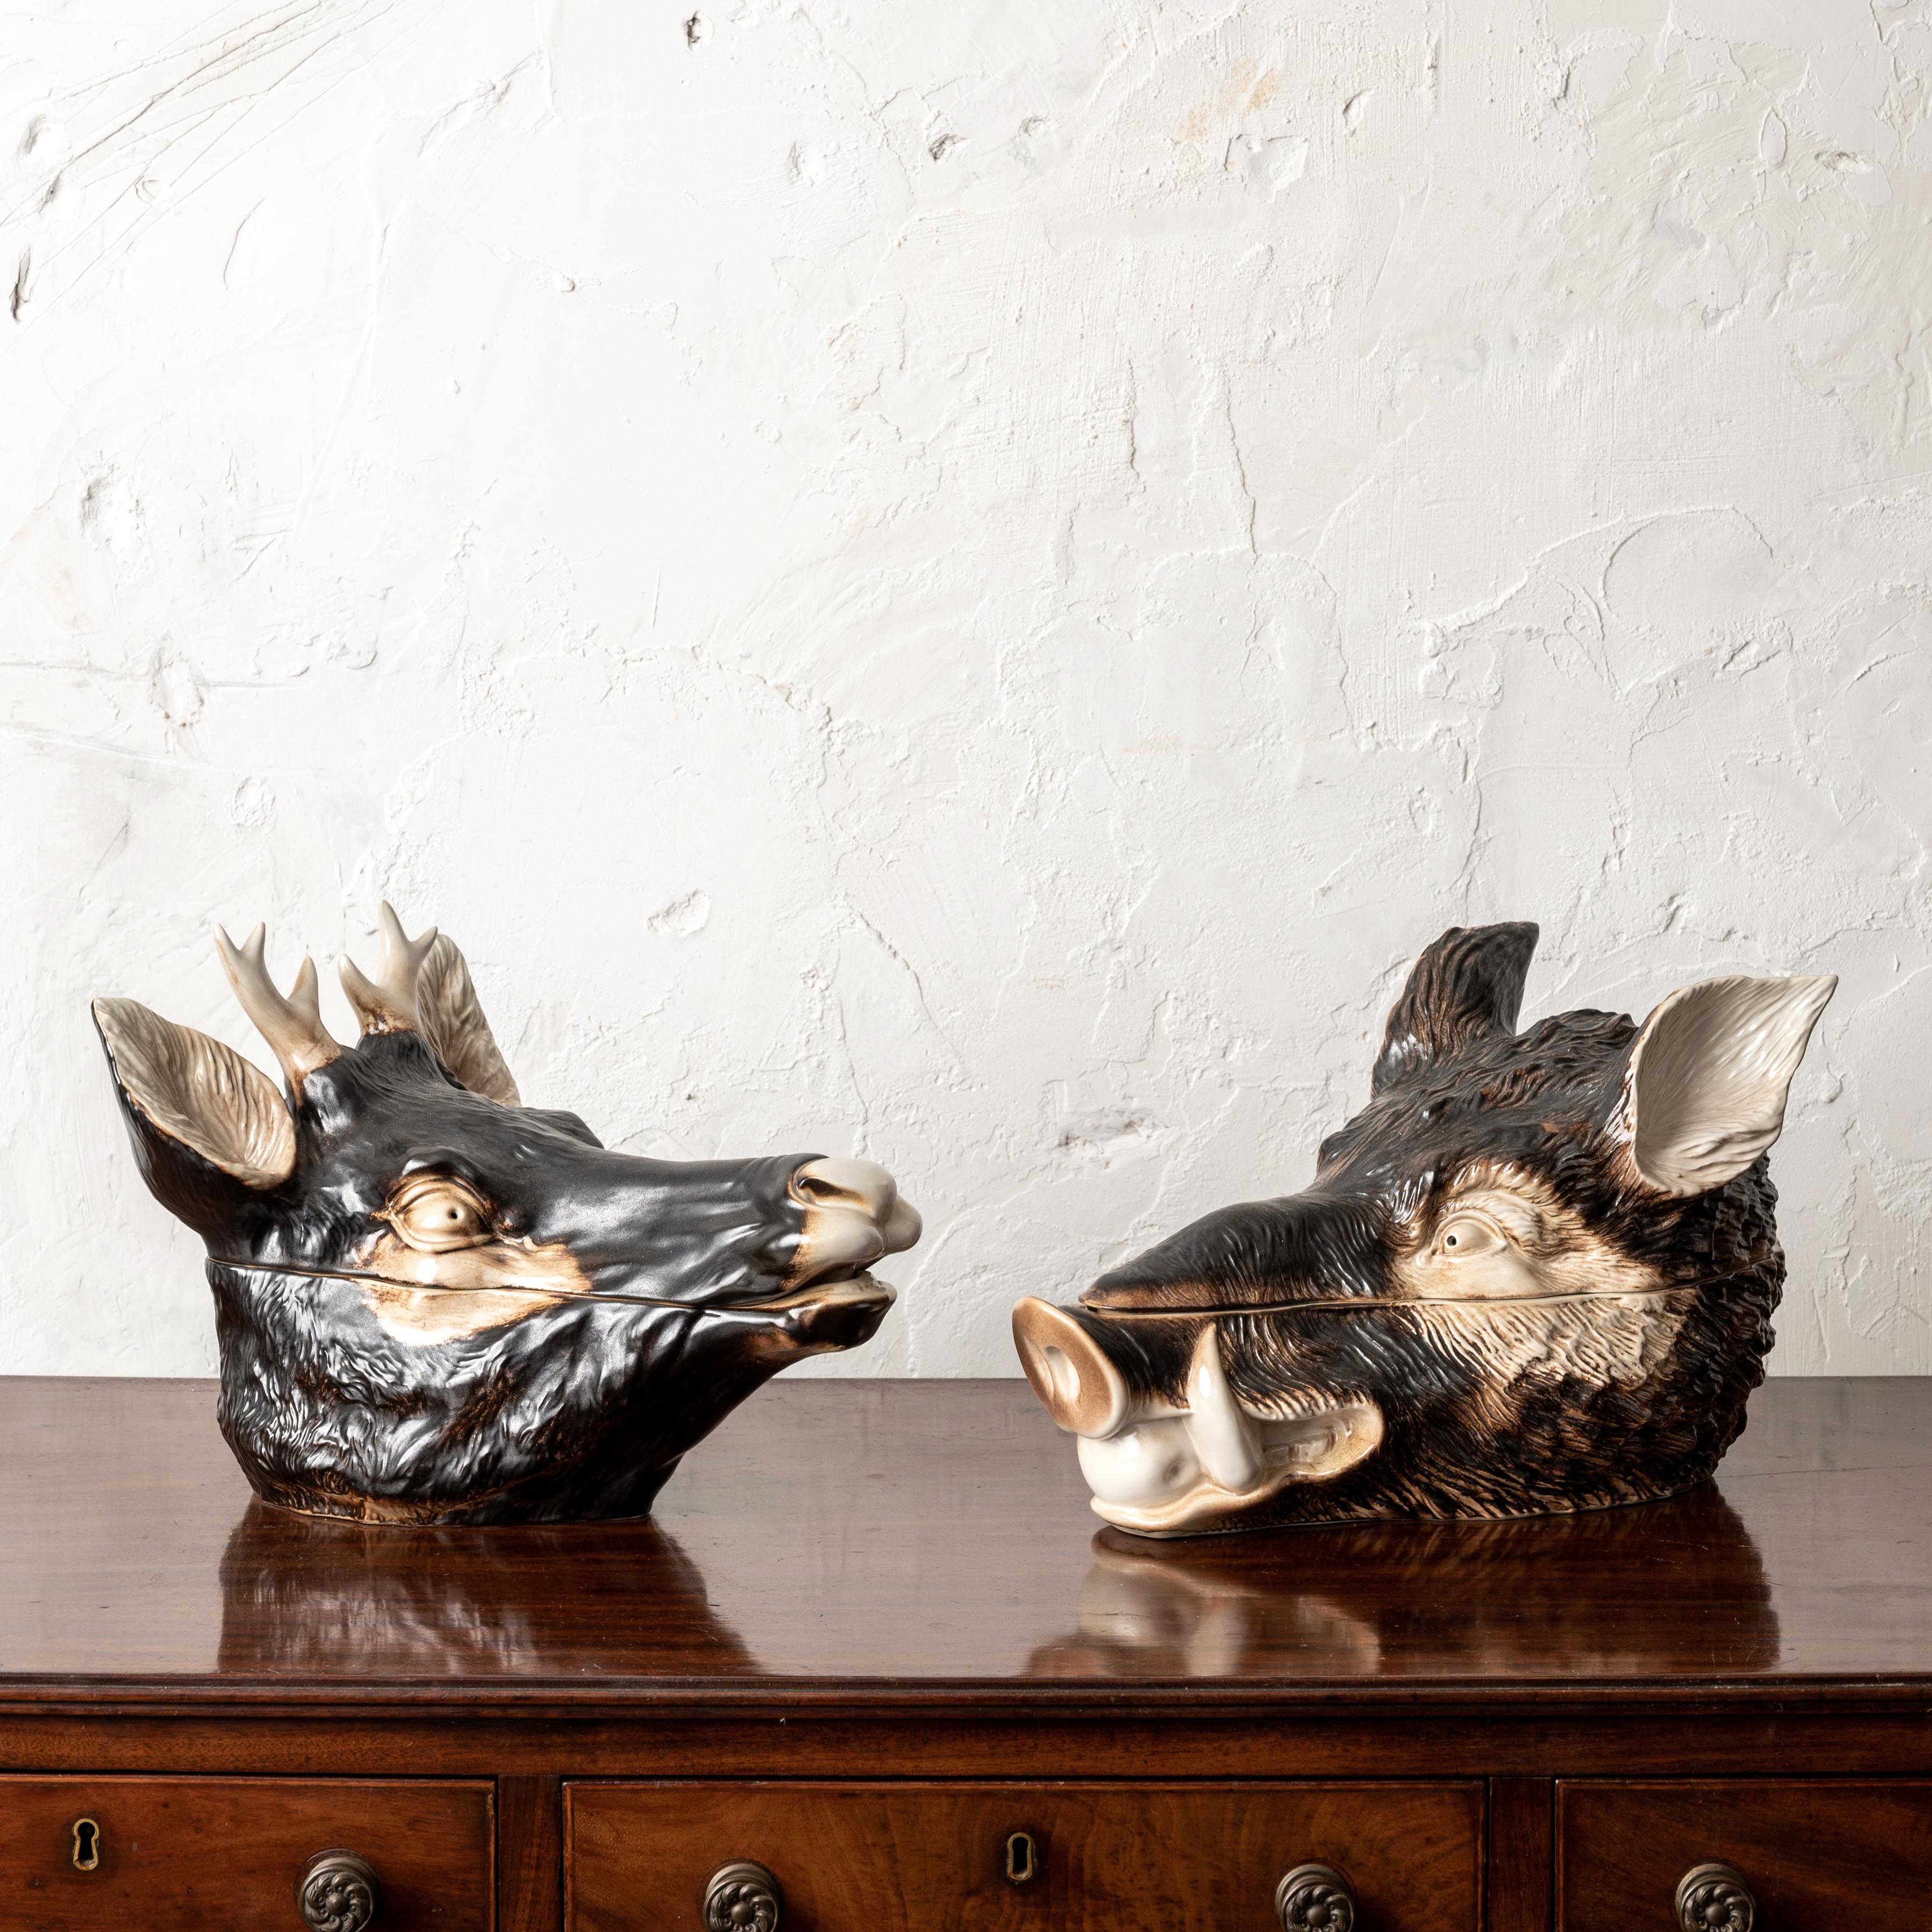 A pair of Italian majolica boar and stag head tureens, mid 20th century.

16 ½ inches wide by 11 inches deep by 10 inches tall

